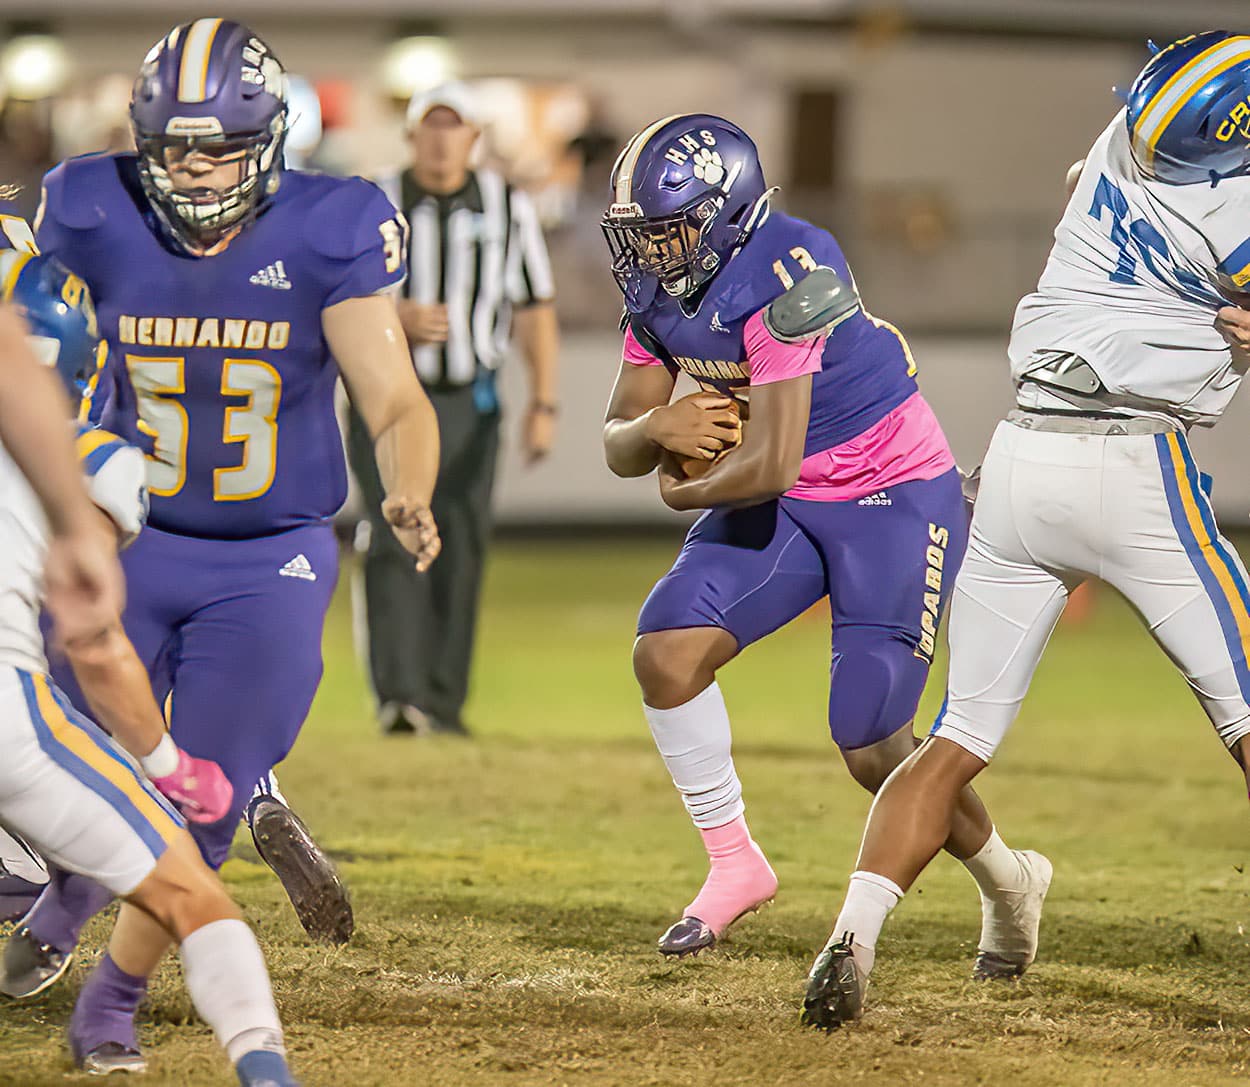 Hernando High running back , 13, Taurian Tucker follows blocking by ,53,Riley Nilsen during the Homecoming game against Crystal River. Photo by JOE DiCRISTOFALO